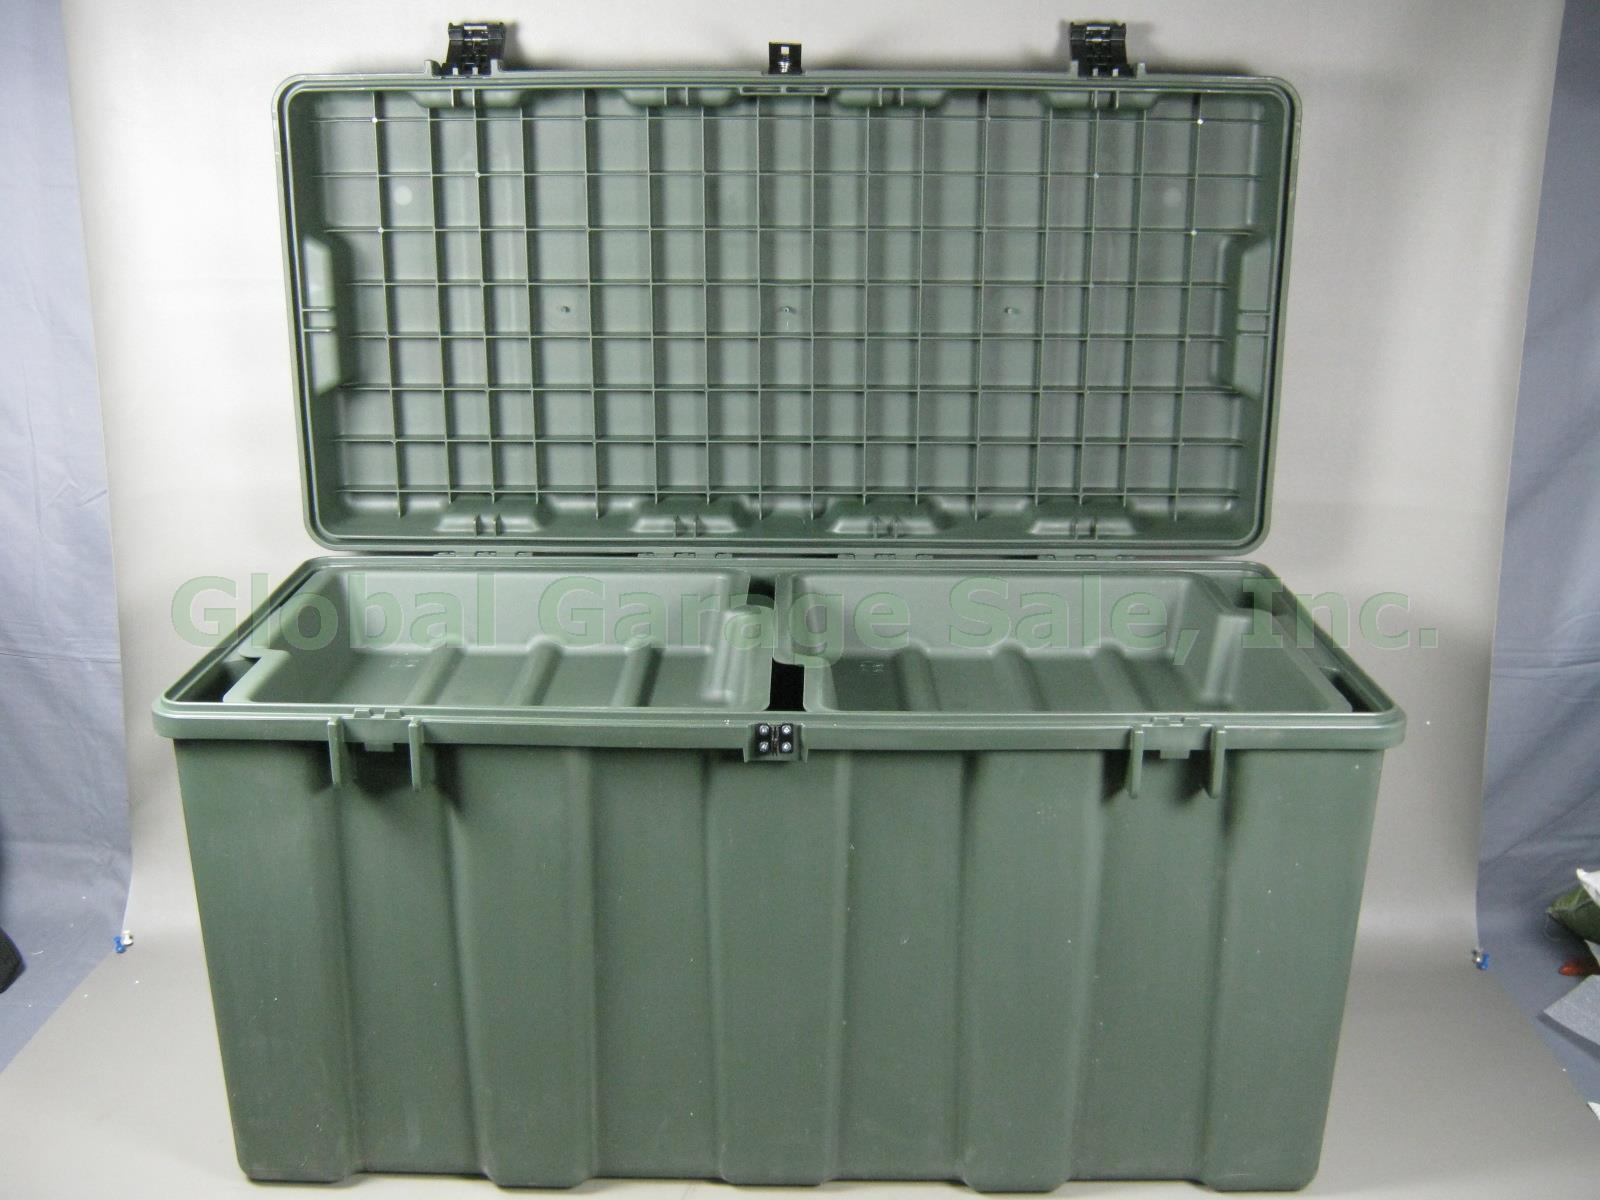 NEW Pelican Hardigg TL 500i US Army Military Foot Locker Trunk With 2 Trays NR! 2